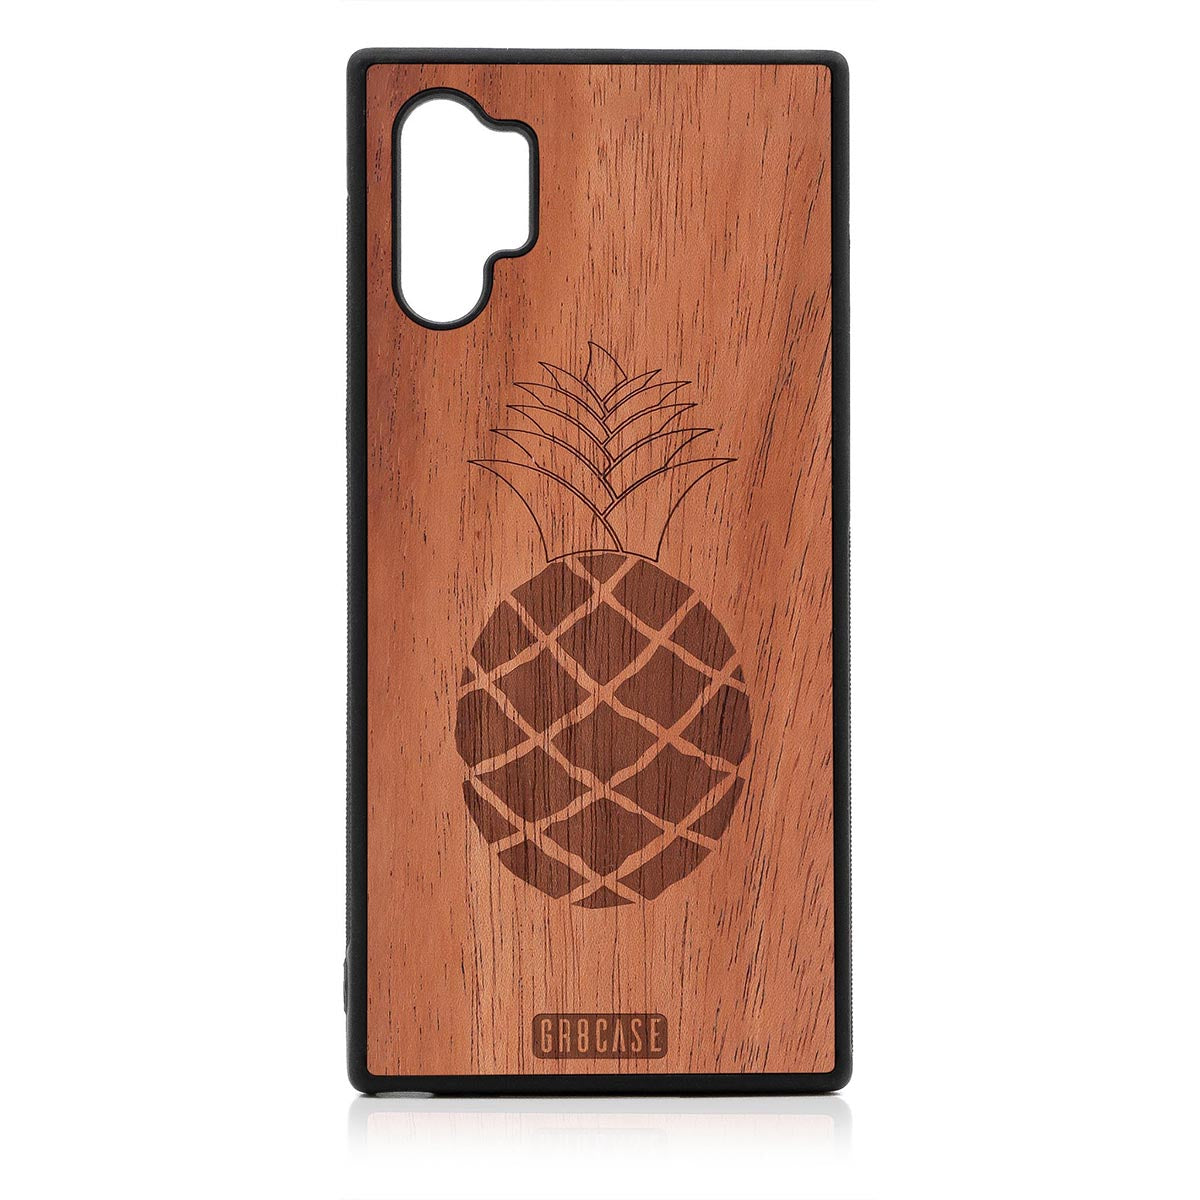 Pineapple Design Wood Case Samsung Galaxy Note 10 Plus by GR8CASE